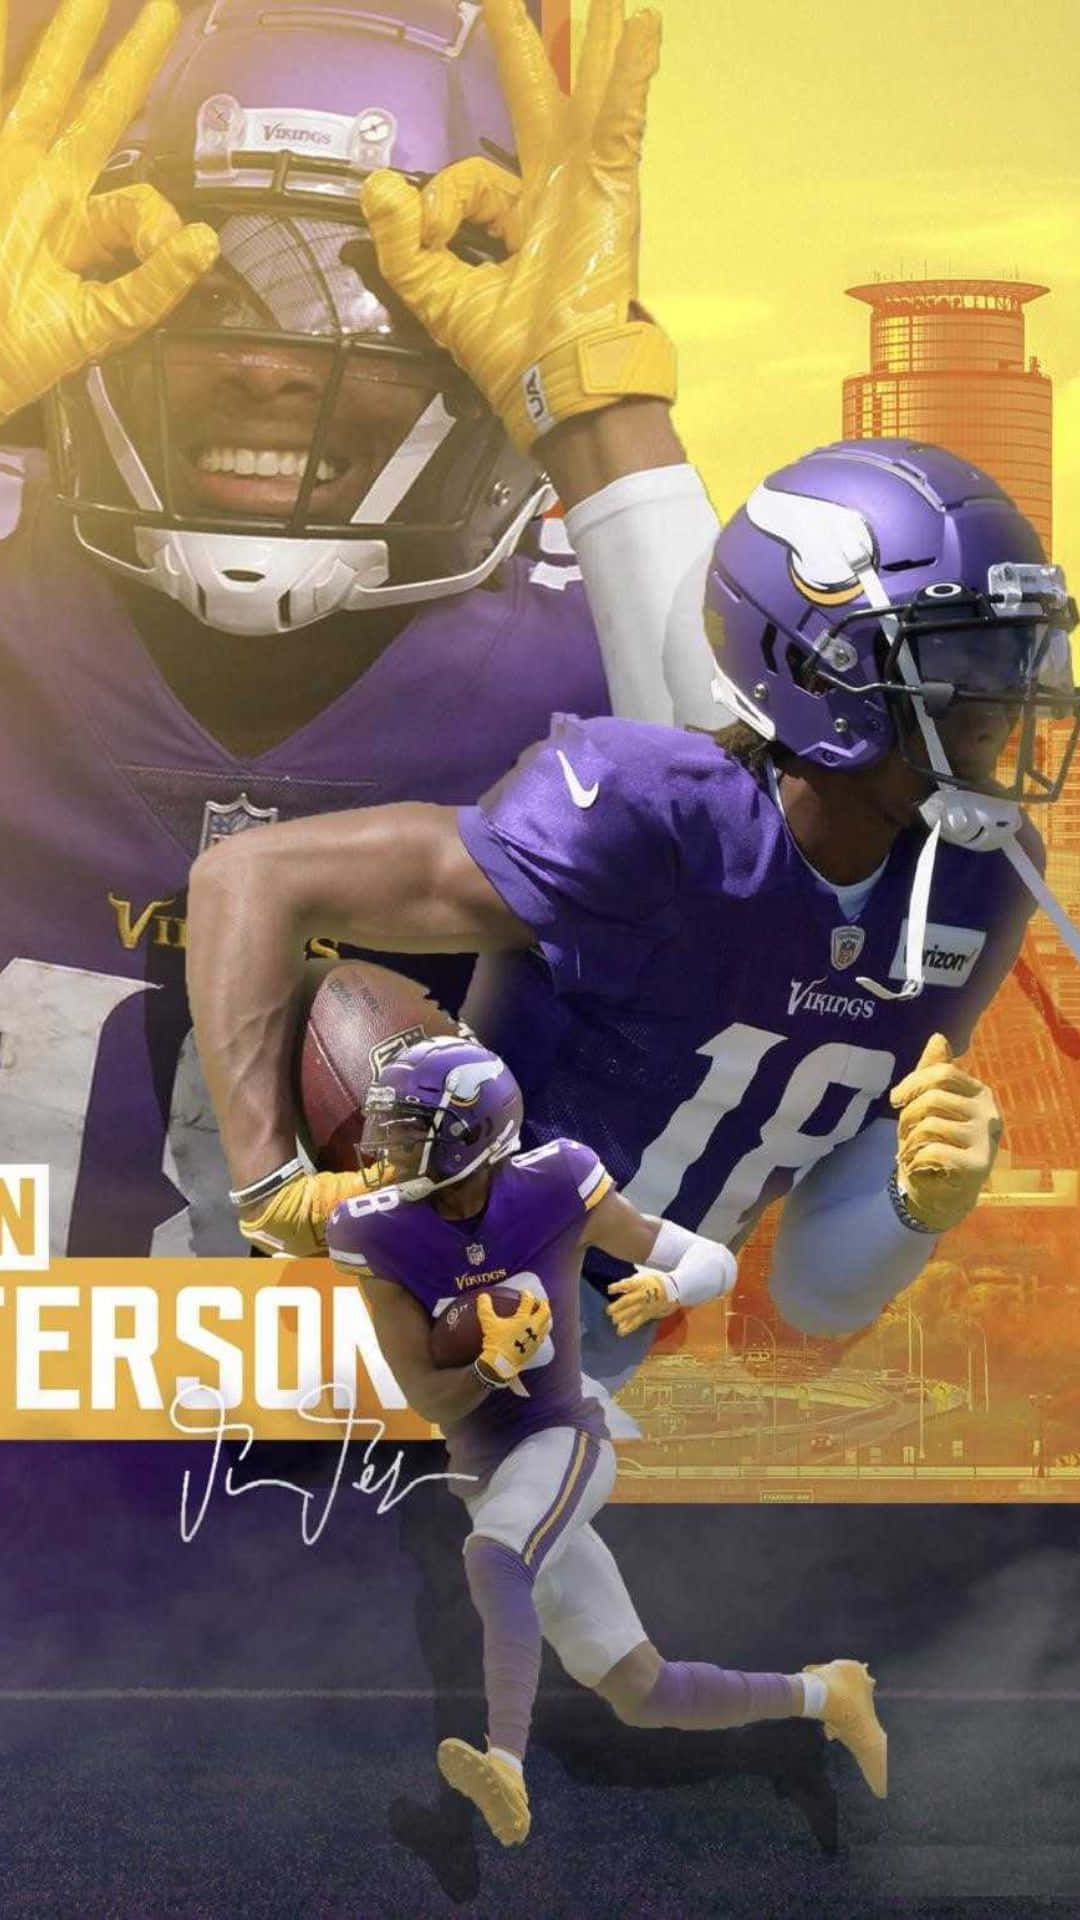 Vikings Football Player Action Collage Wallpaper